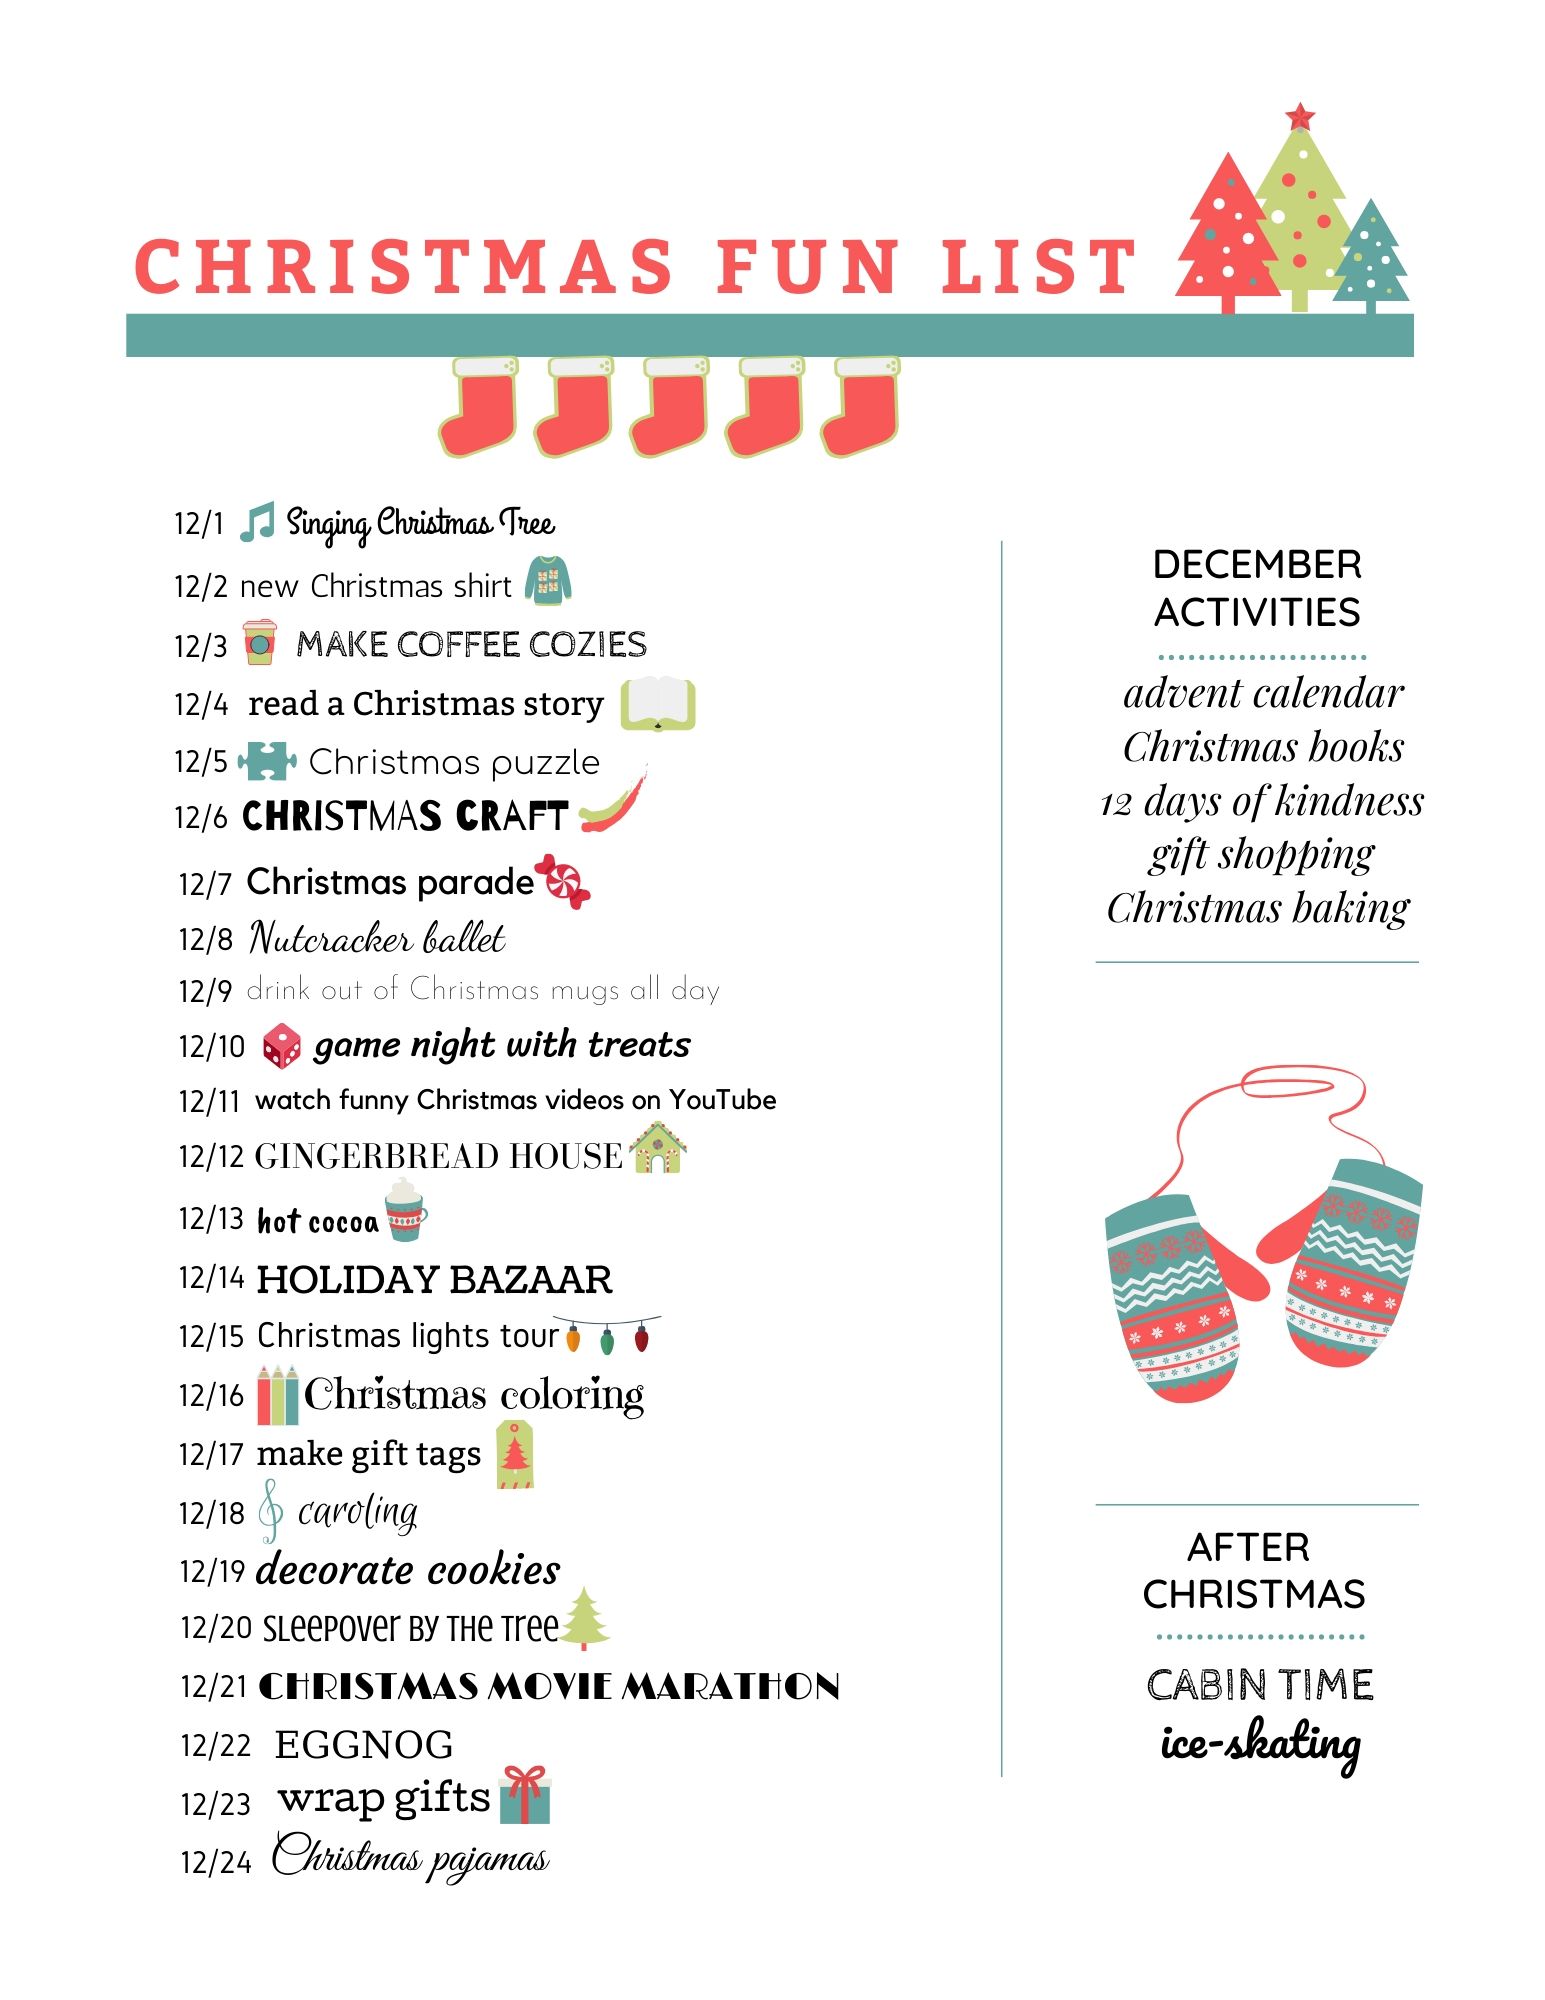 Christmas fun list.  Holiday activities for the month of December.